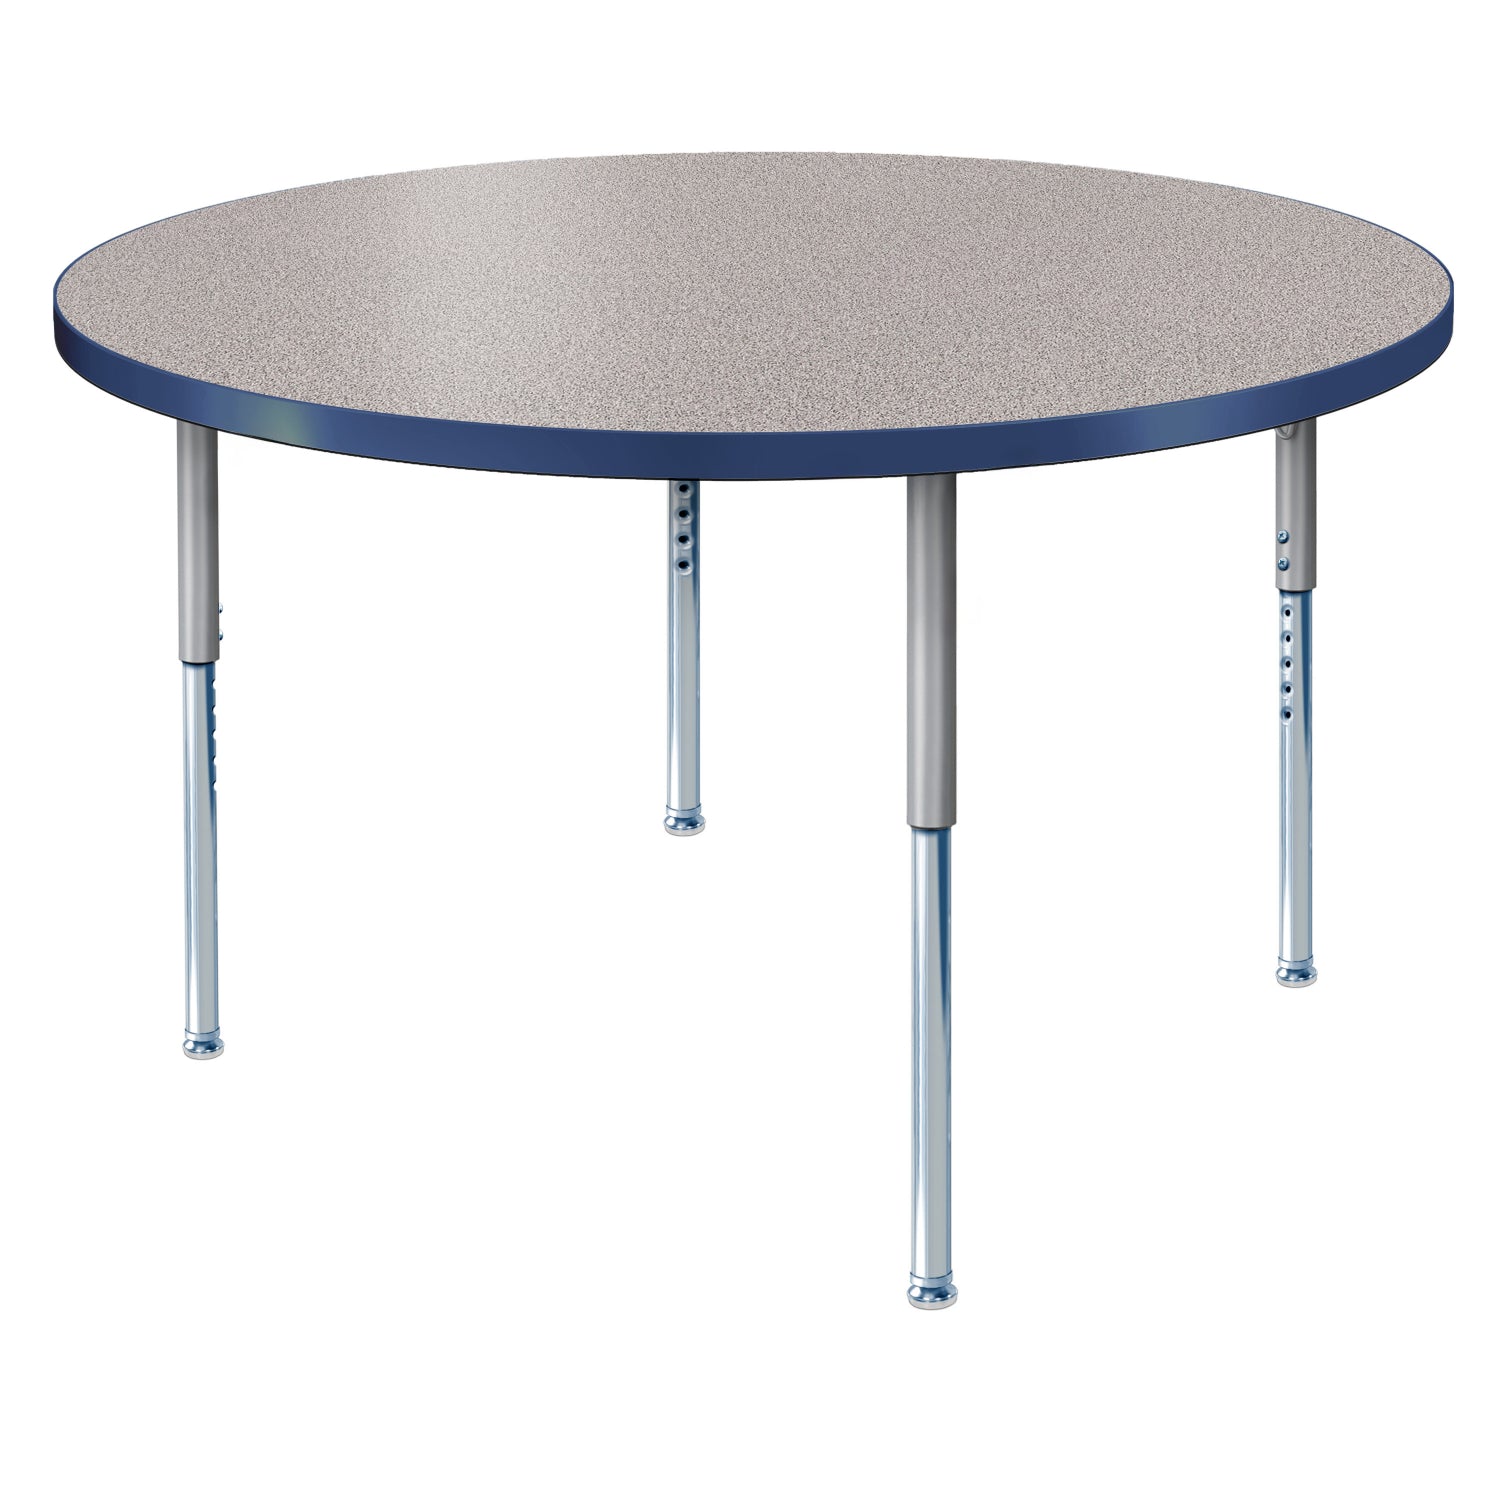 Modern Classic Series 36" Circle Activity Table with High Pressure Laminate Top, Adjustable Height Legs